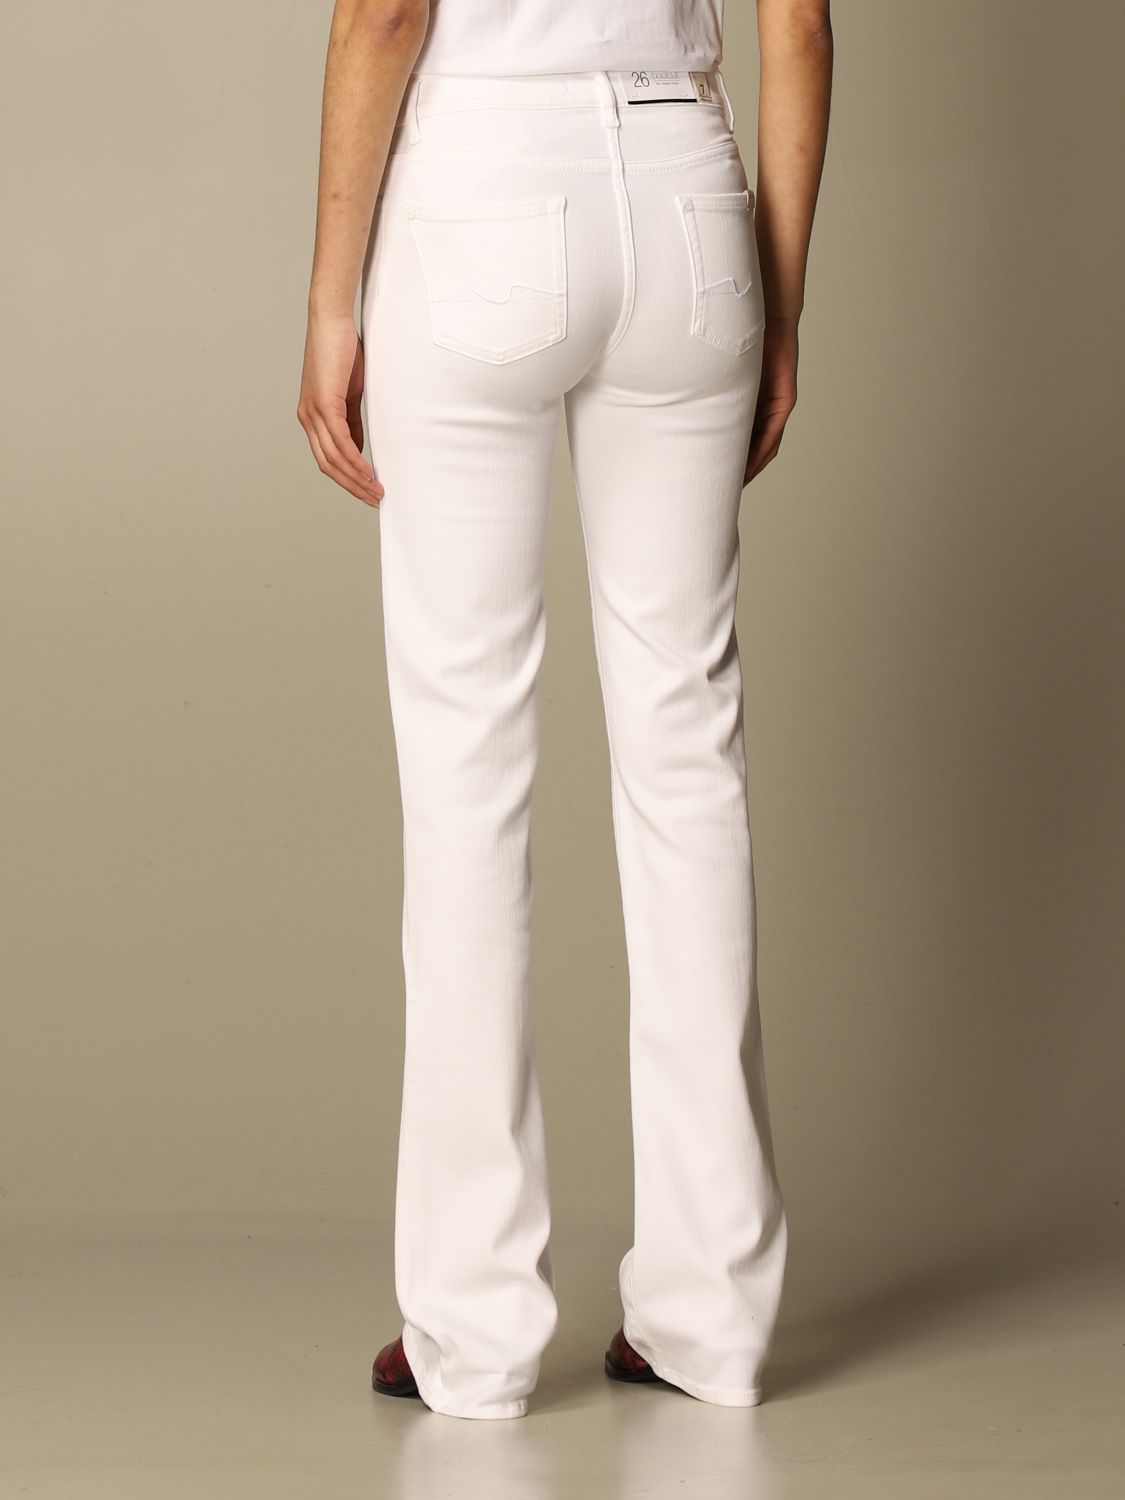 Jeans 7 For All Mankind: Jeans women 7 For All Mankind white 2